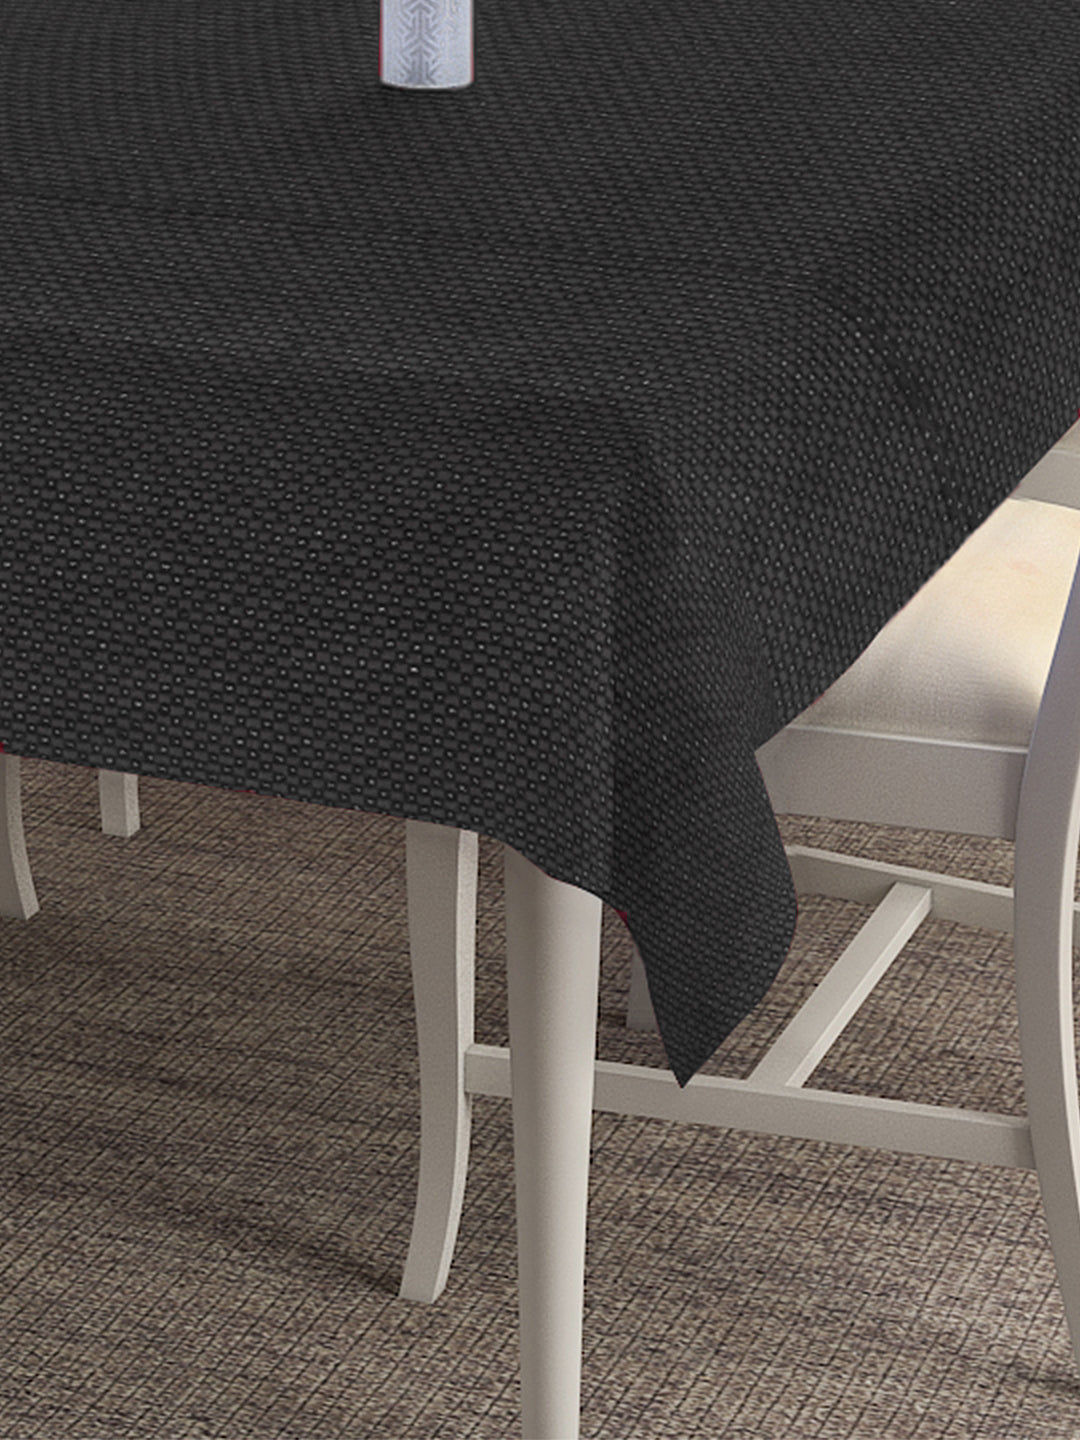 KLOTTHE Black Cotton Solid Table Cover (72X52 Inch)